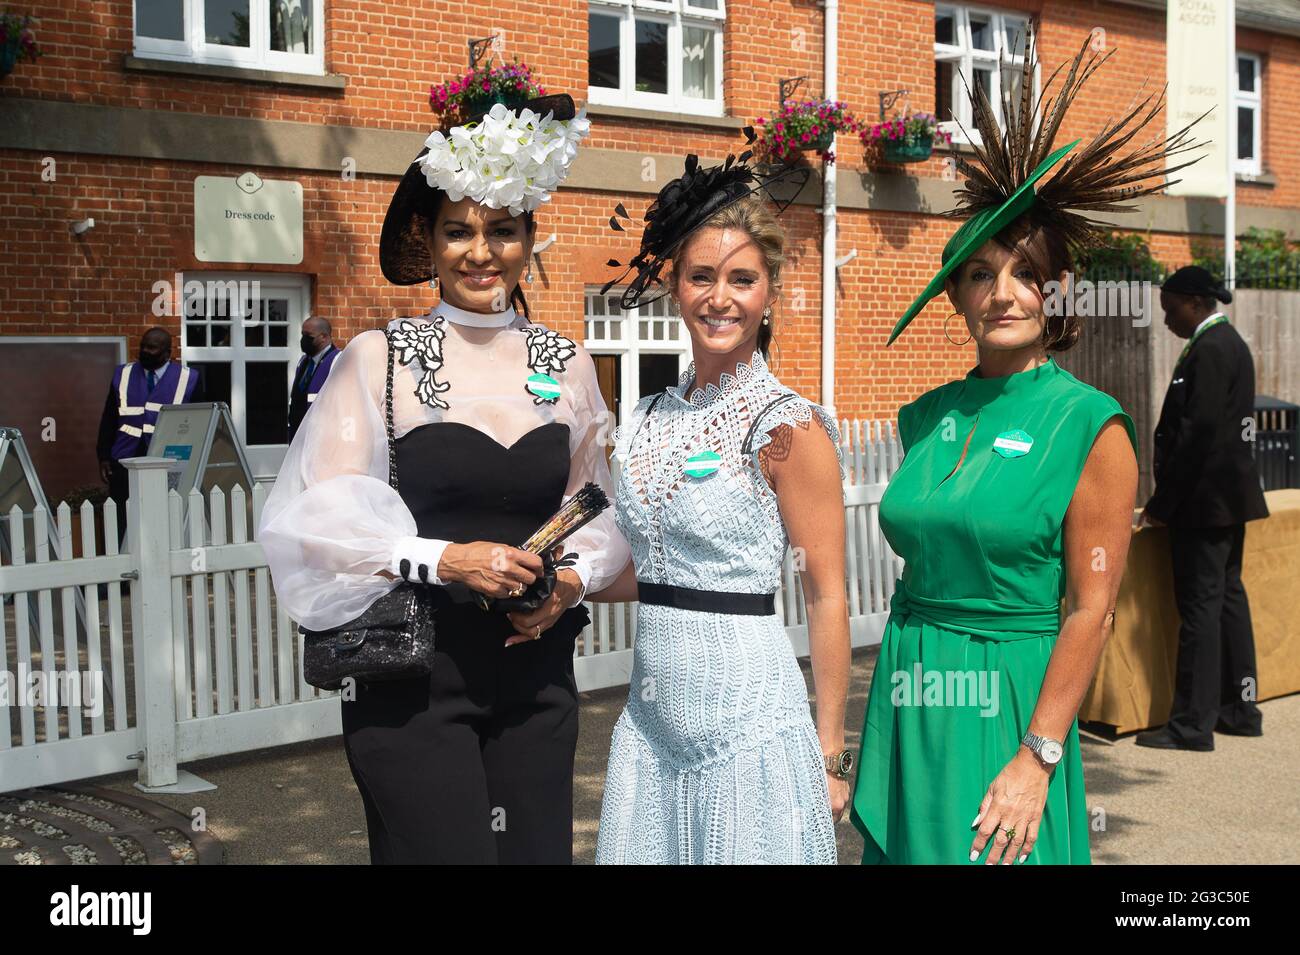 Royal Ascot Day One, Ascot, Berkshire, UK - 15 Jun 2021. Lady Wilnelia Forsyth, Lucy Woodward and Milliner Ilda Di Vico (R). Racegoers were delighted to be back at Royal Ascot again this morning. This year is a scaled down event with 12,000 racegoers per day being allowed into Ascot Racecourse following the easing of some of the Covid-19 Lockdown restrictions. Racegoers are required to provide proof of a negative Covid-19 lateral flow test before being allowed access to the course. Credit: Maureen McLean/Alamy Stock Photo